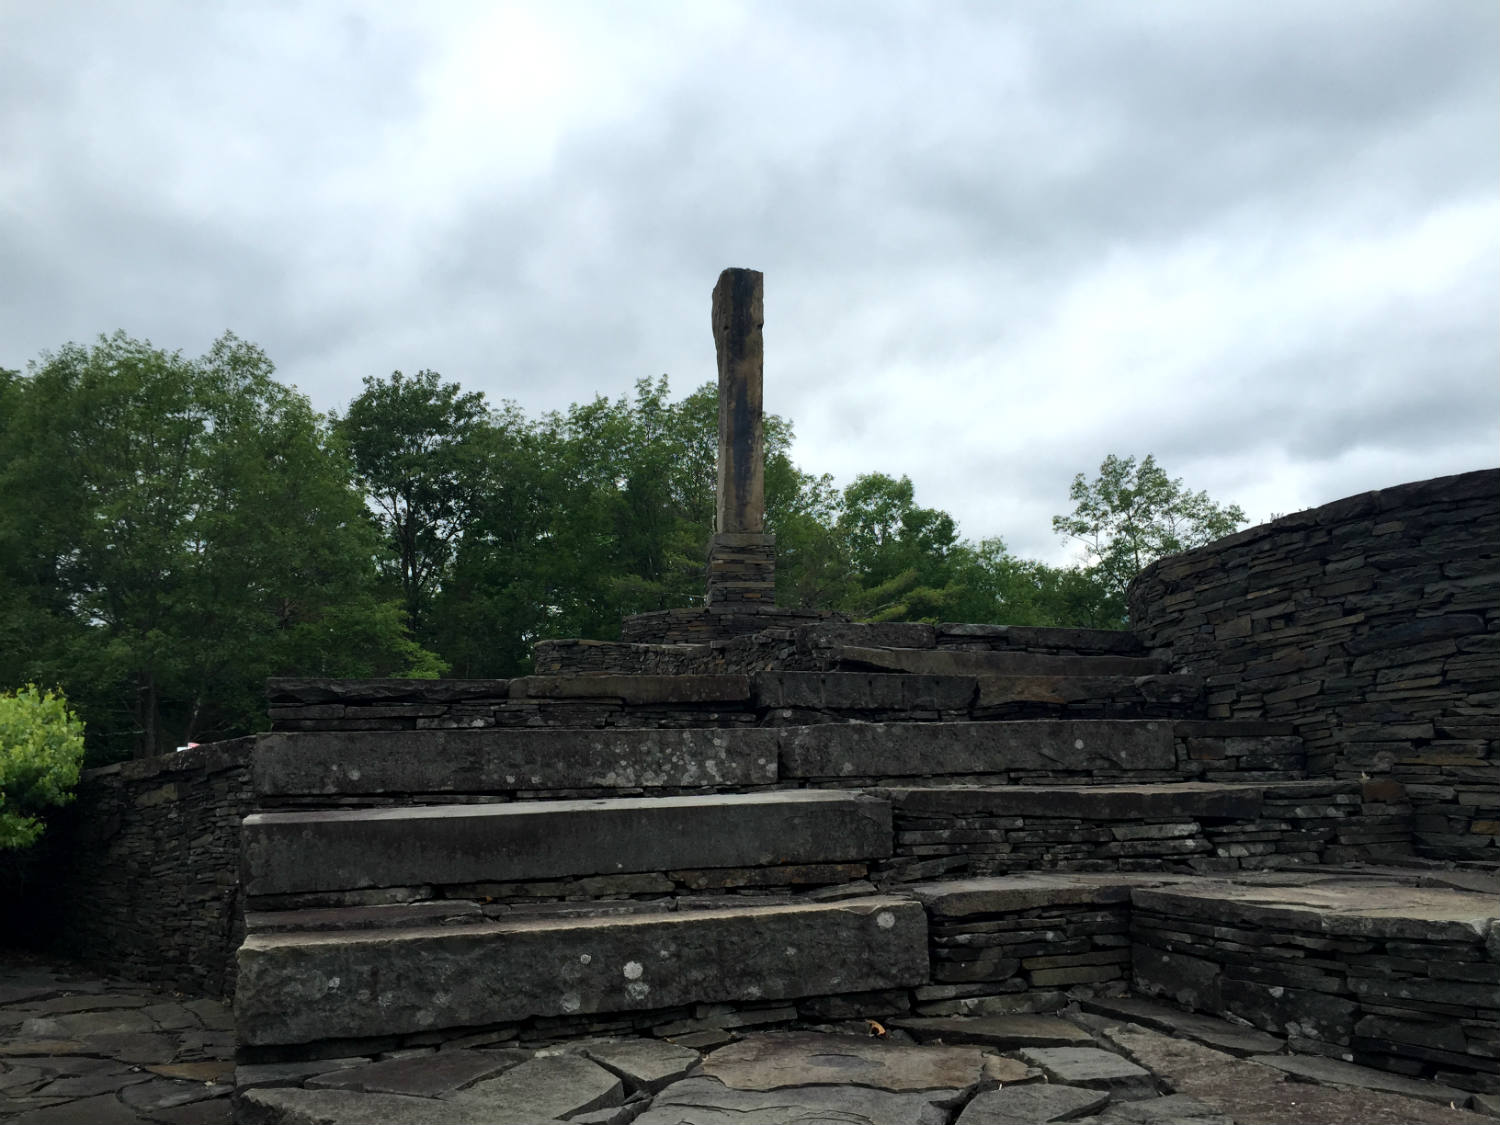 The Flame at Opus 40